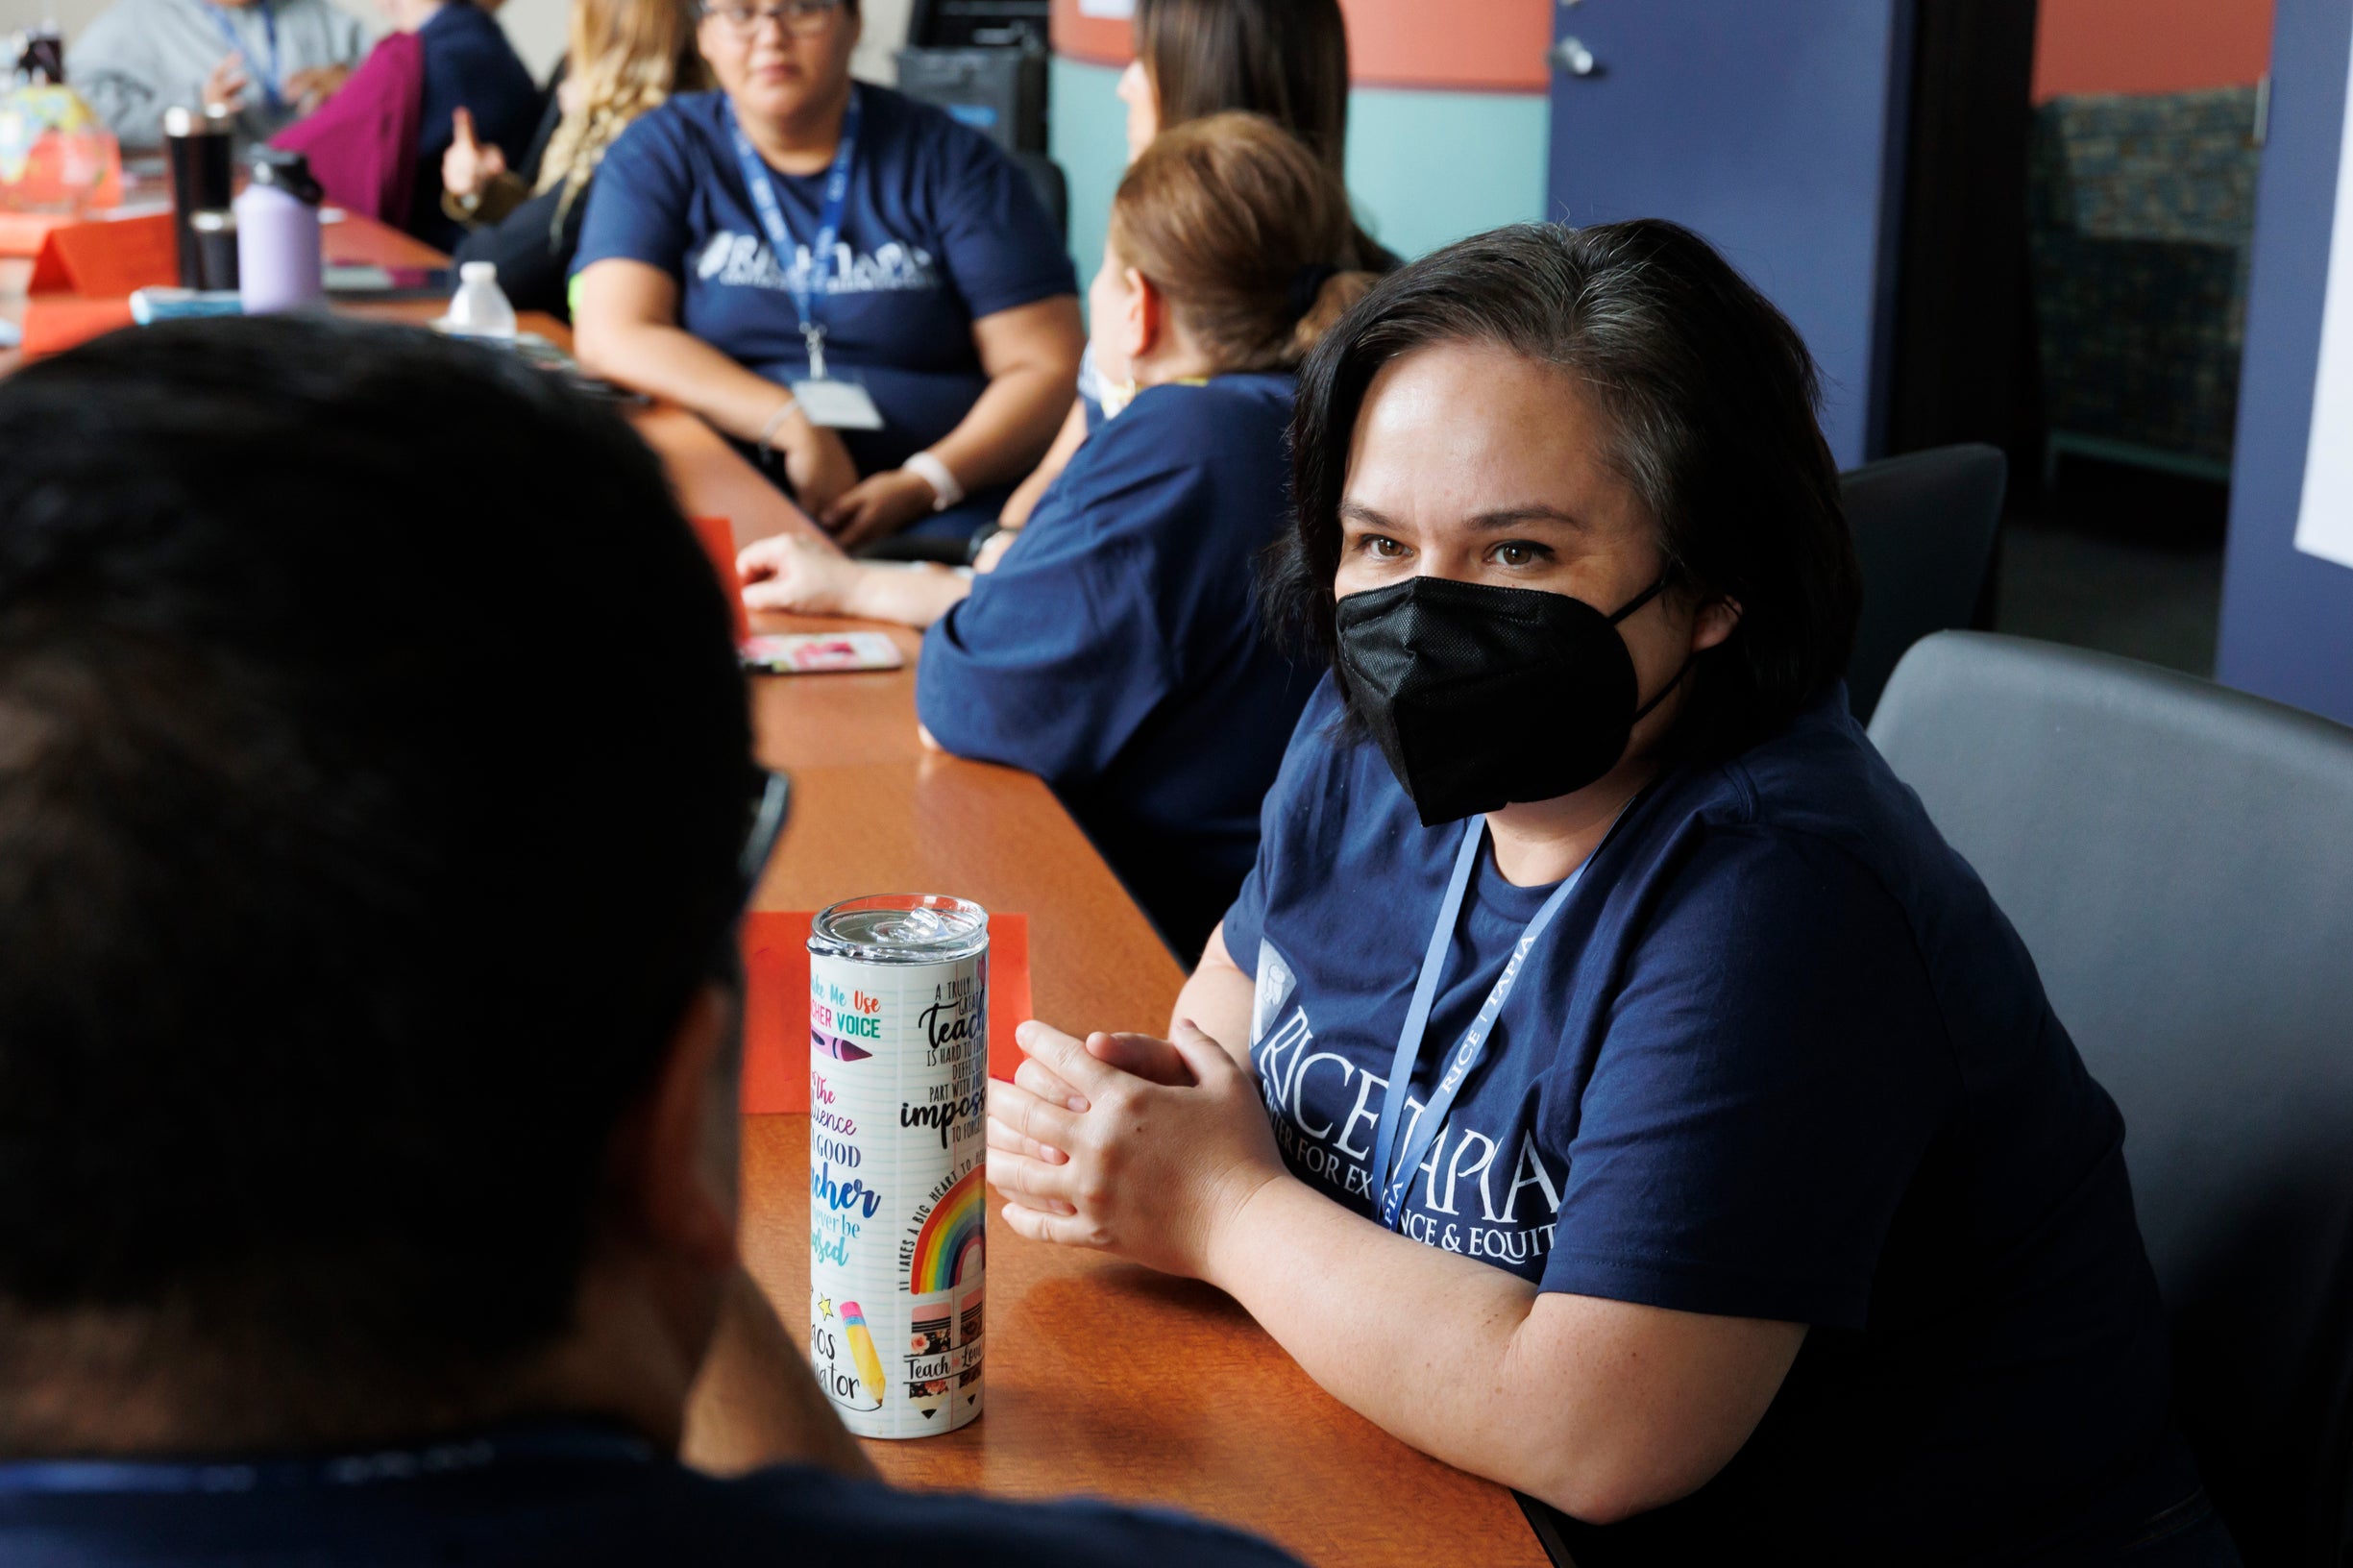 Educator wearing a face mask is looking at another educator while in discussion with others.